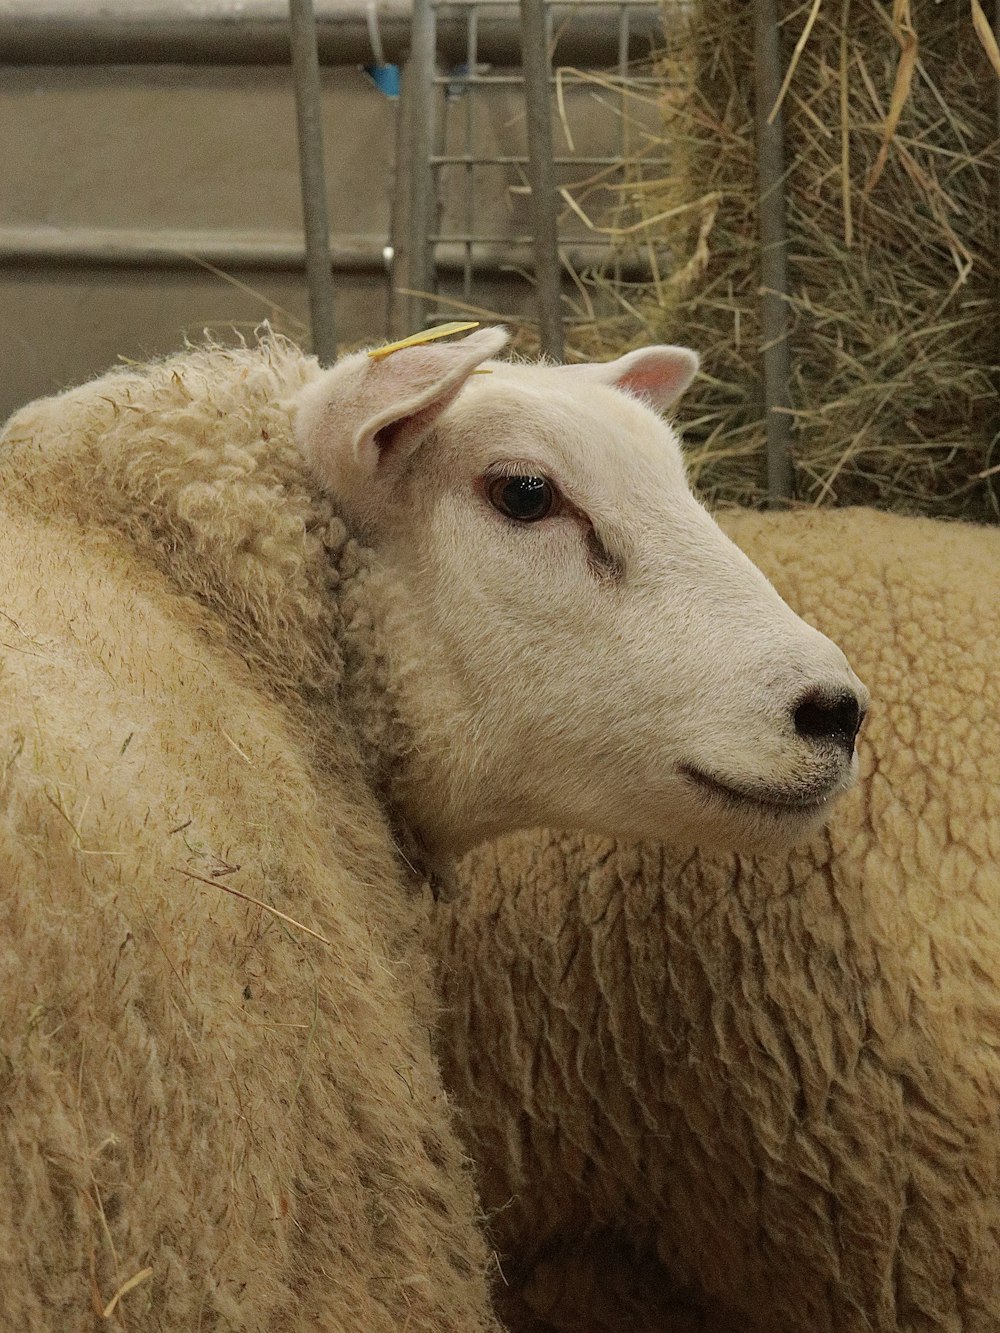 a close up of two sheep in a pen